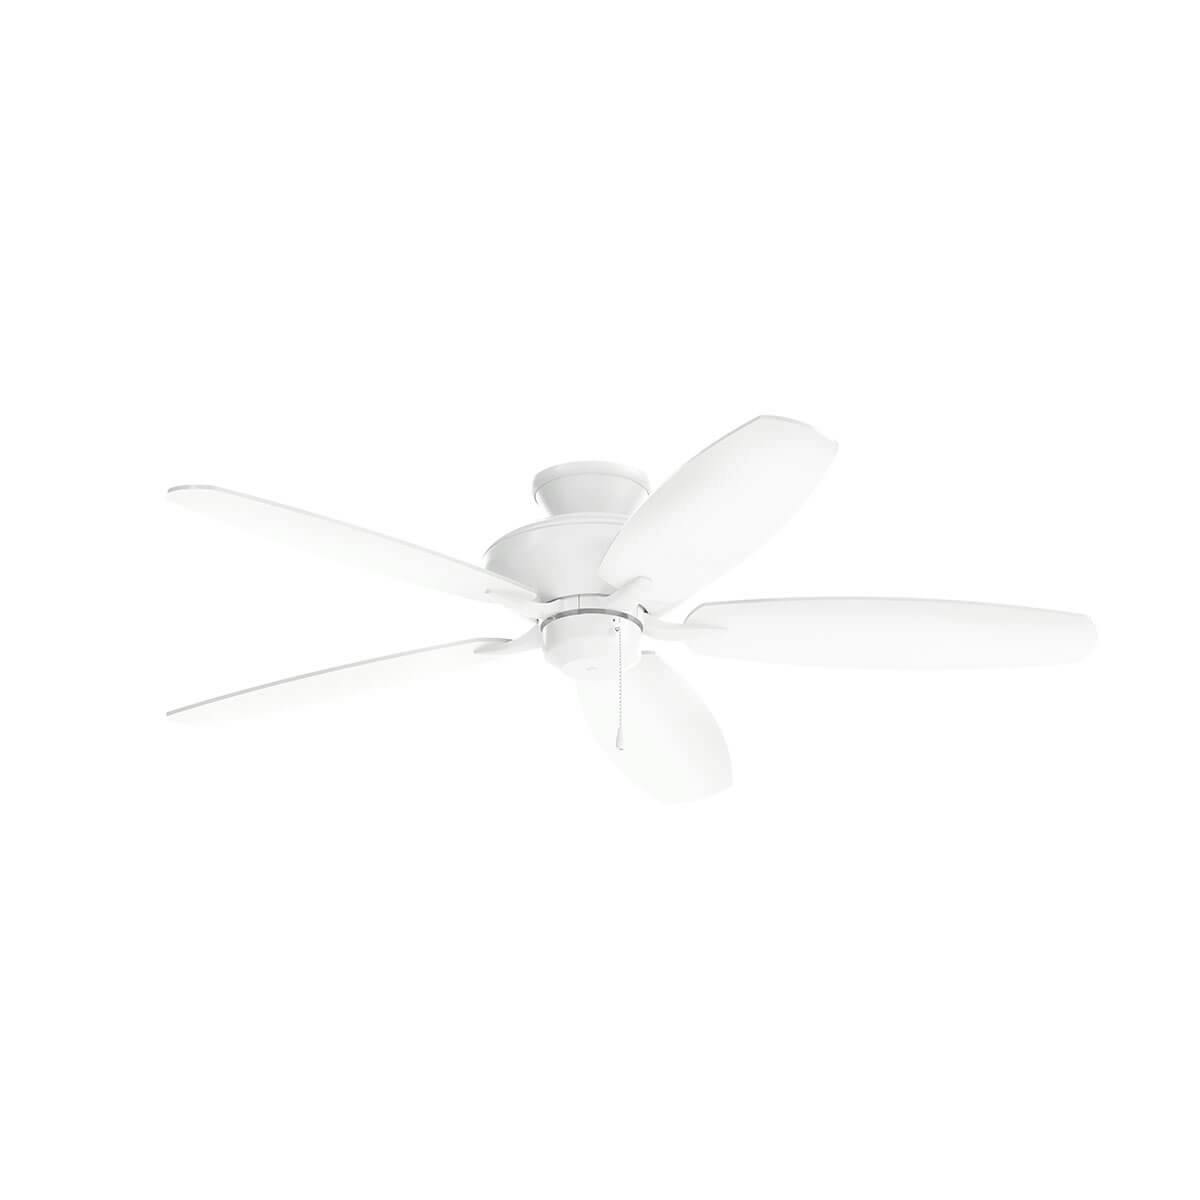 Product Image of ceiling fan 330164MWH